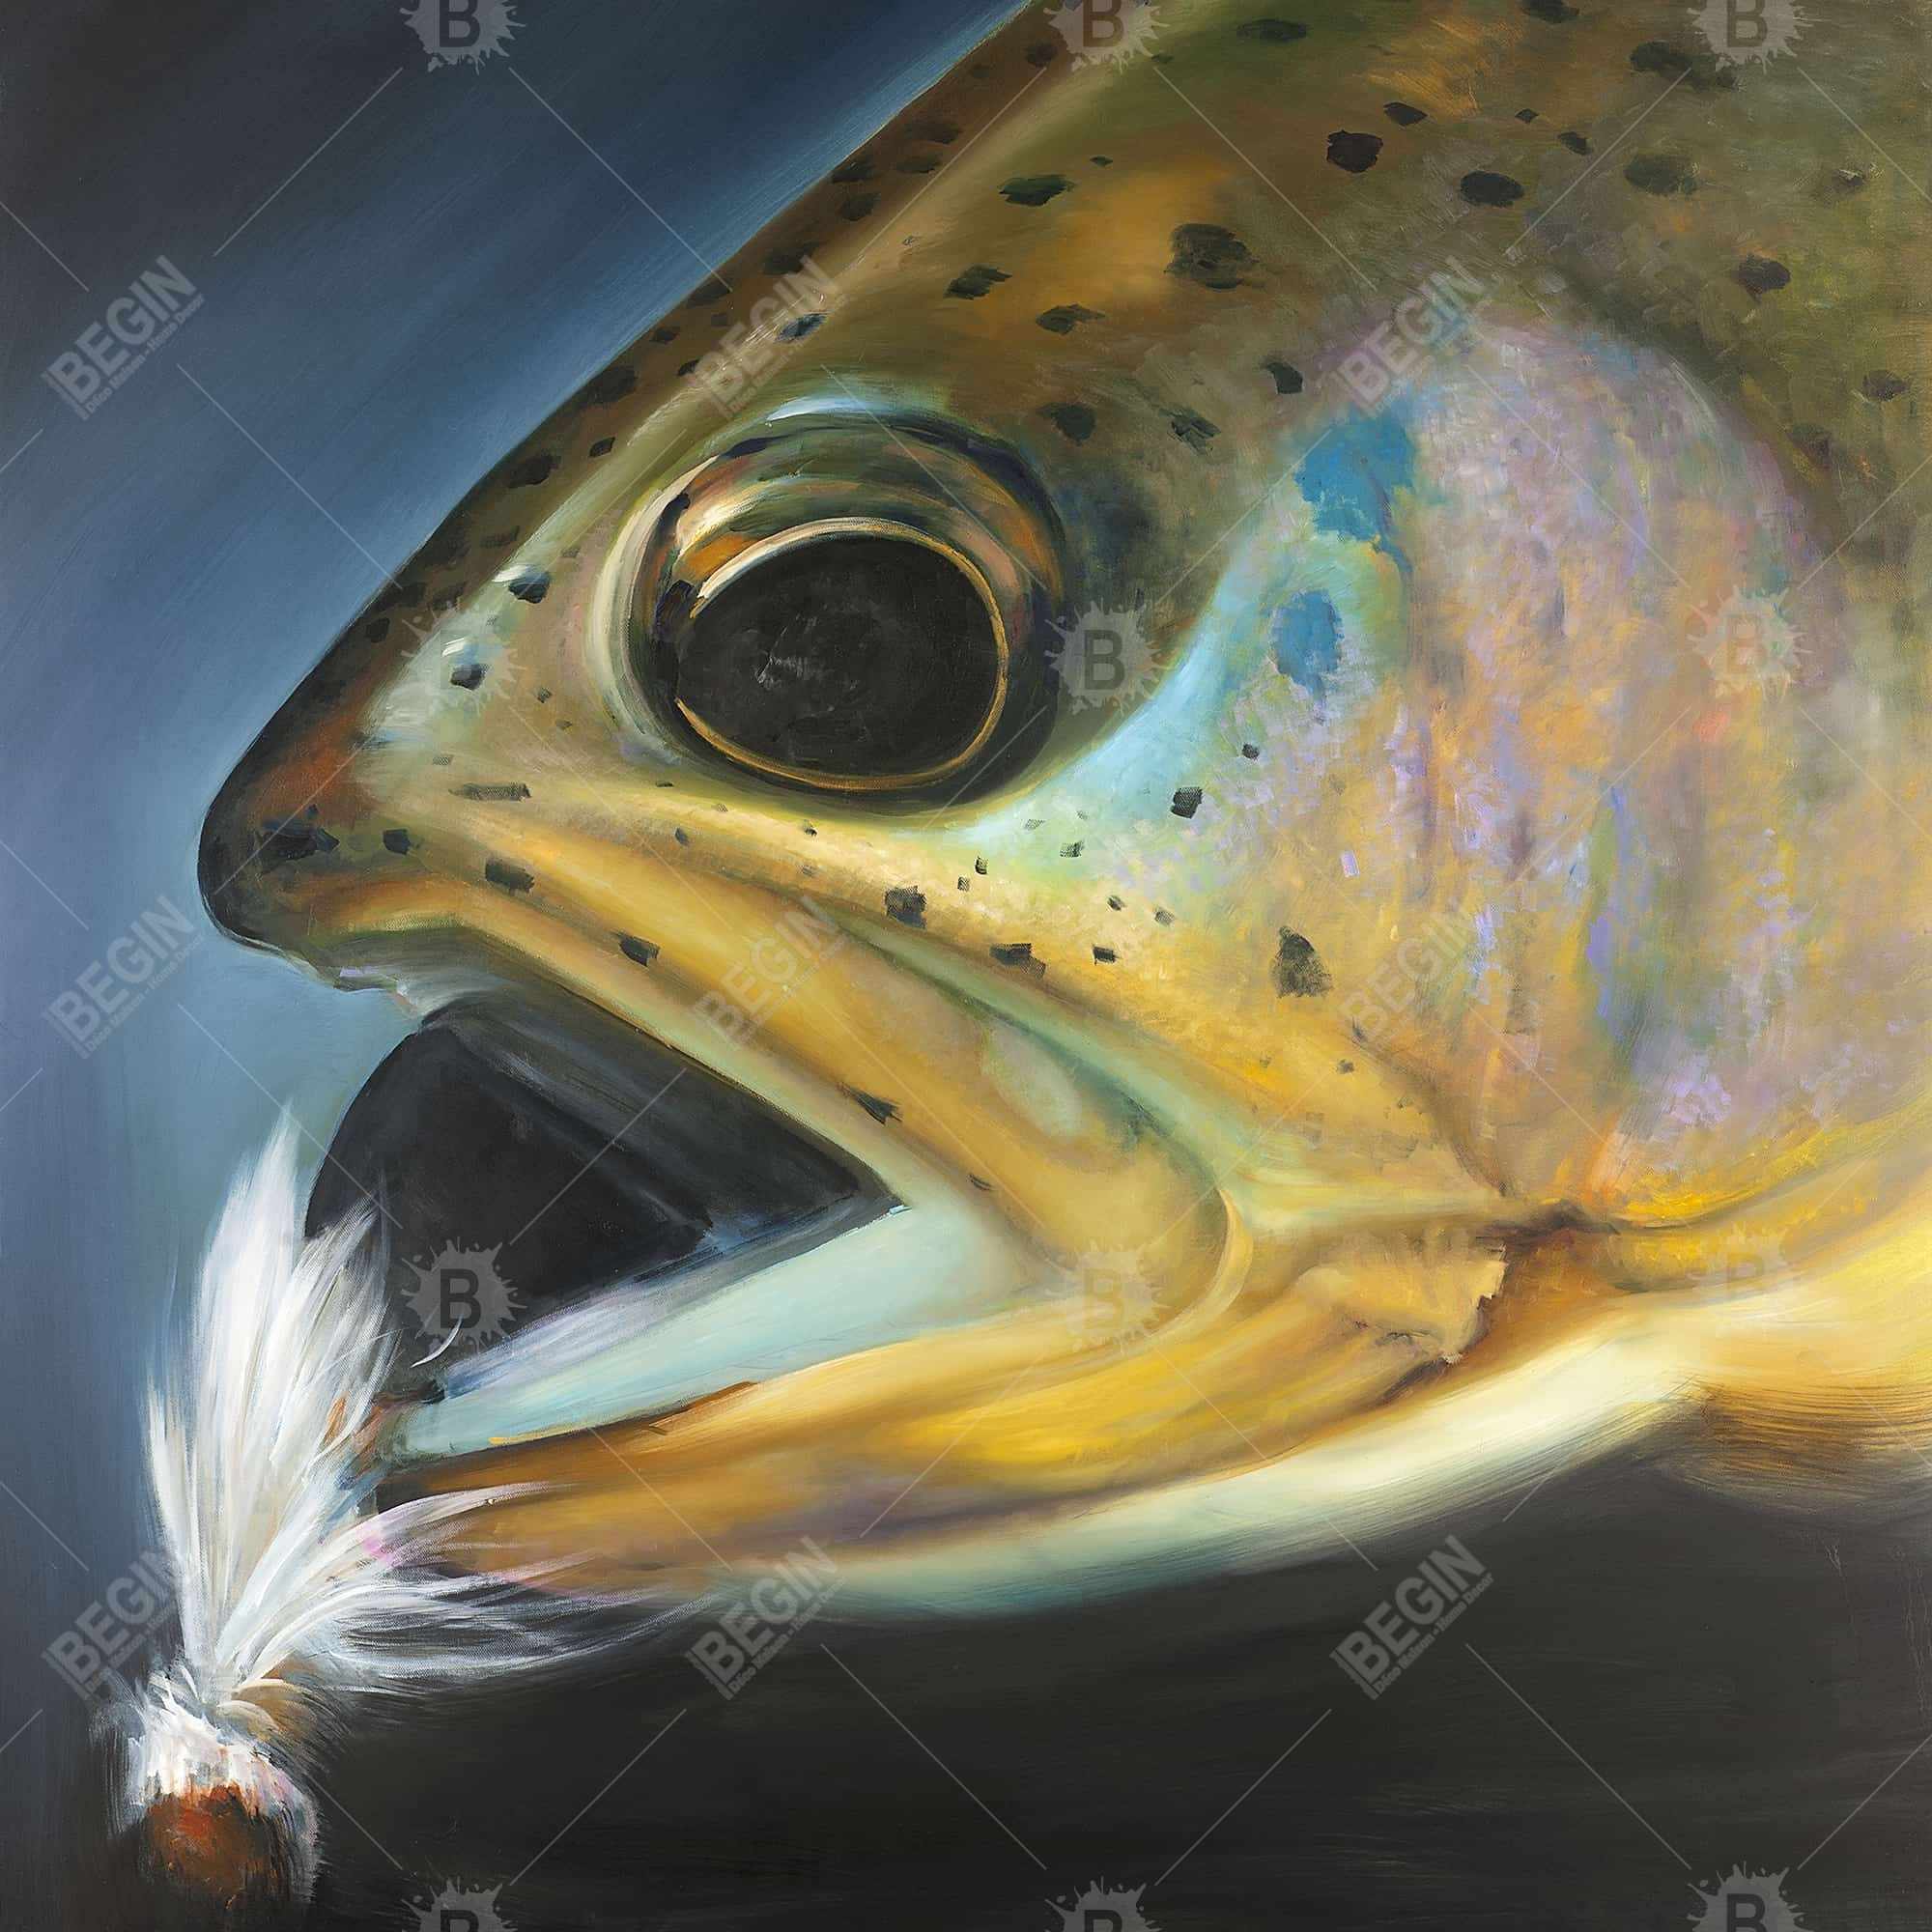 Golden trout with fly fishing flie